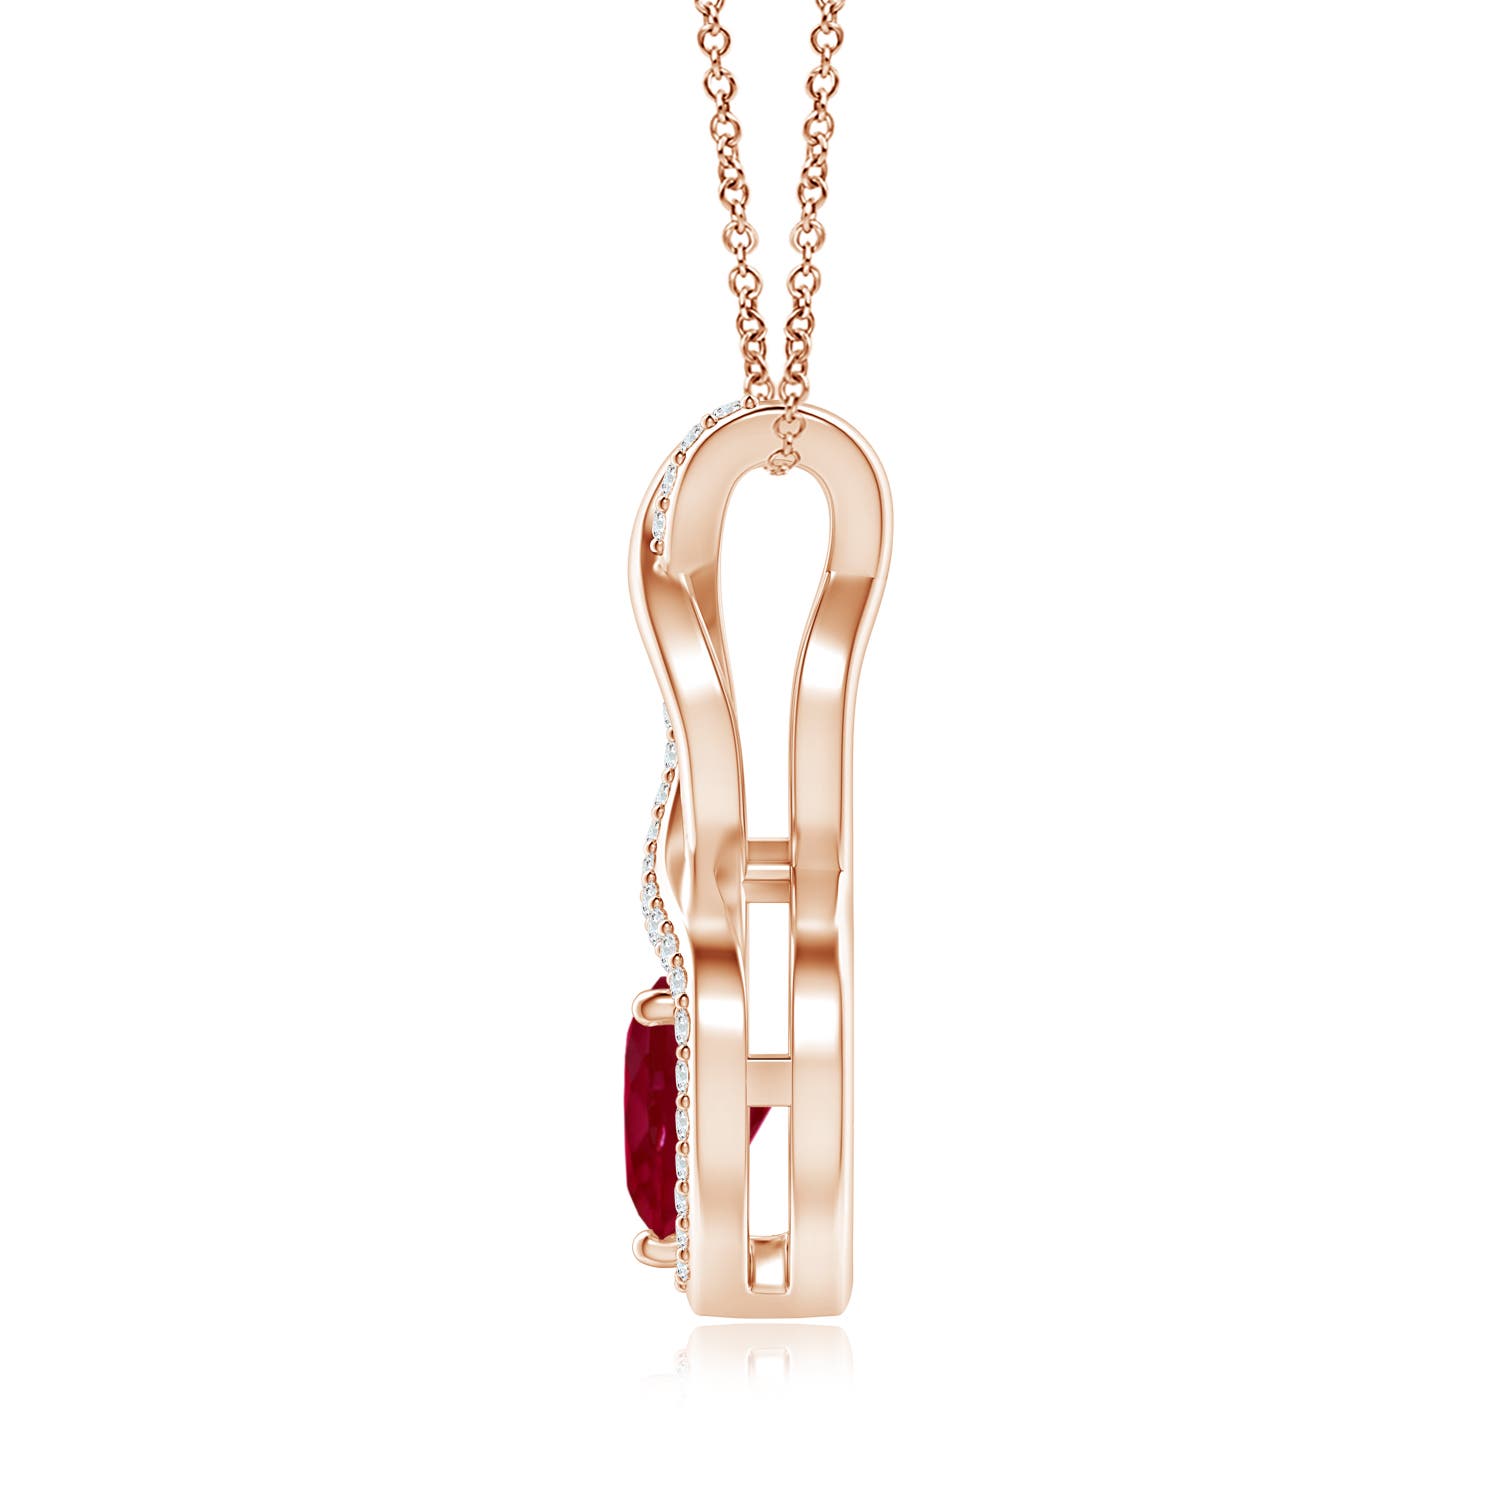 AA - Ruby / 0.88 CT / 14 KT Rose Gold